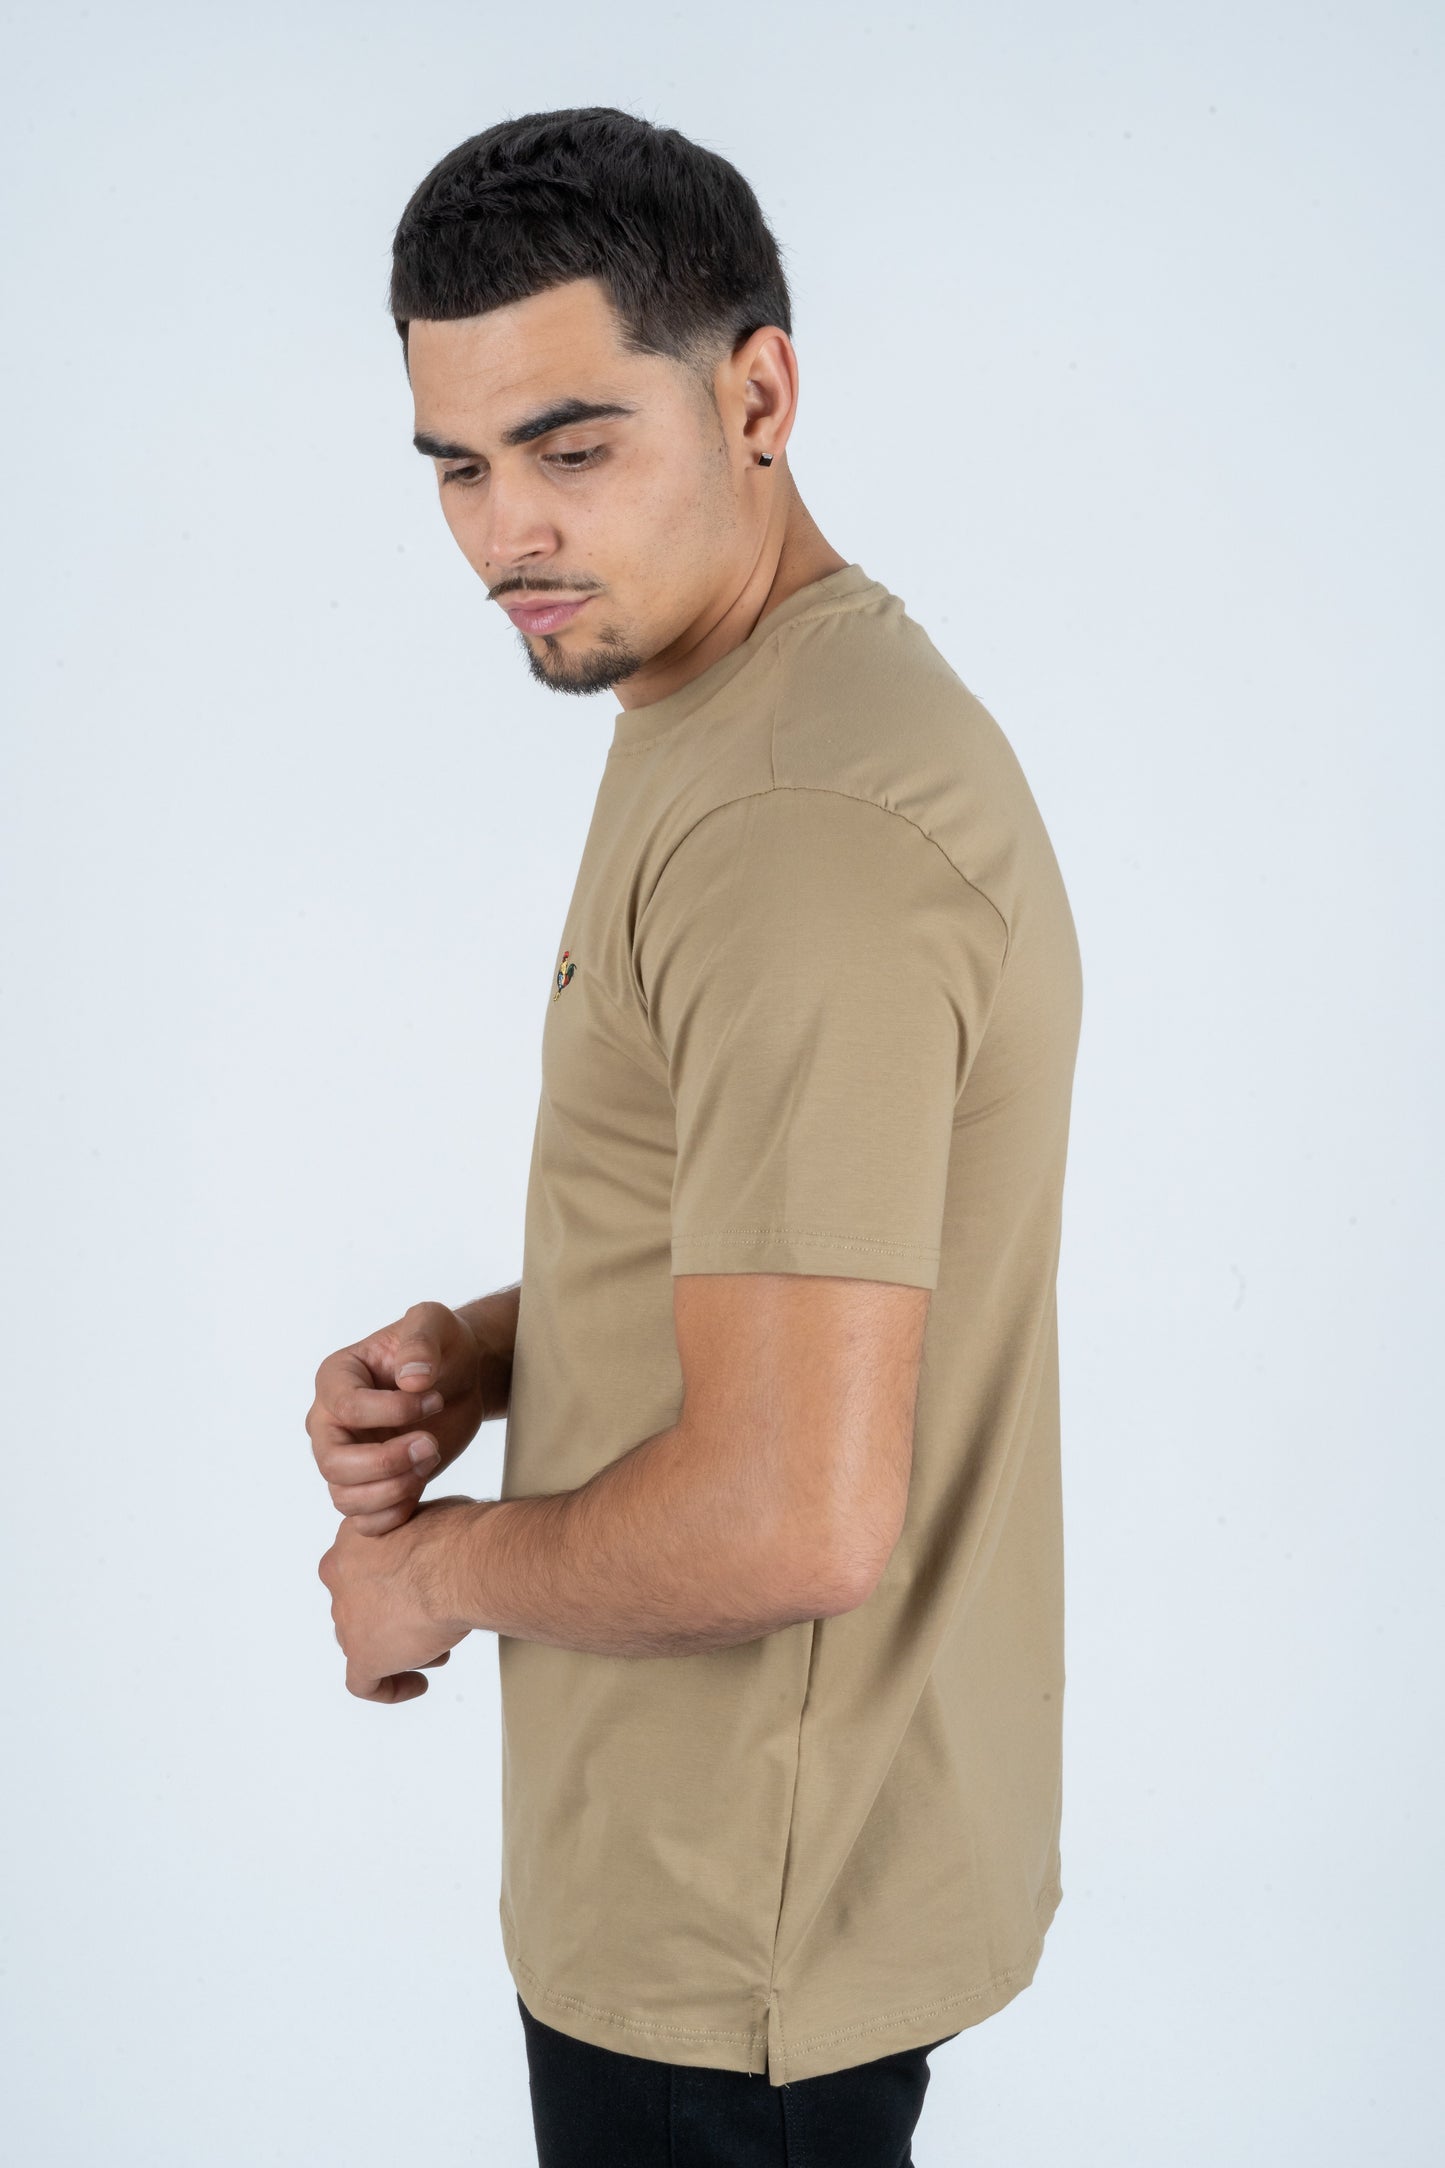 Mens Rooster Chest Embroidery Khaki T-shirt